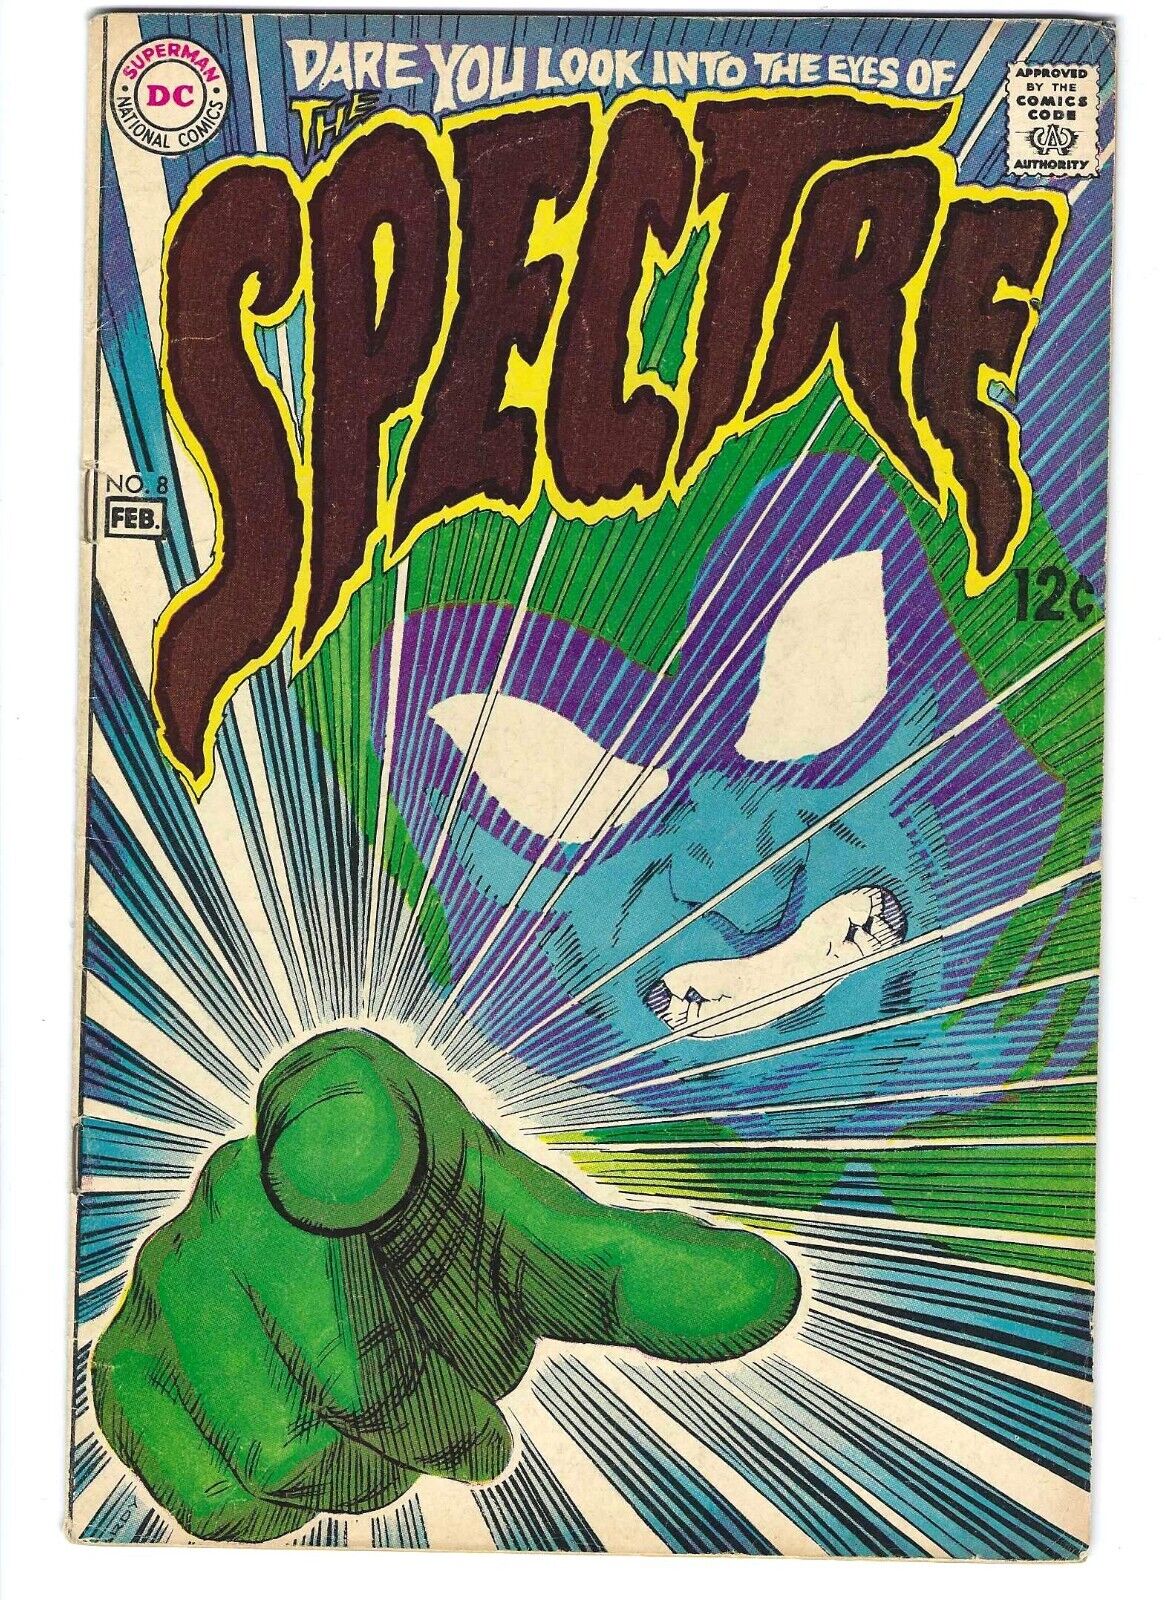 Spectre #8 VG+ / Nick Cardy CLASSIC Cover, 1969